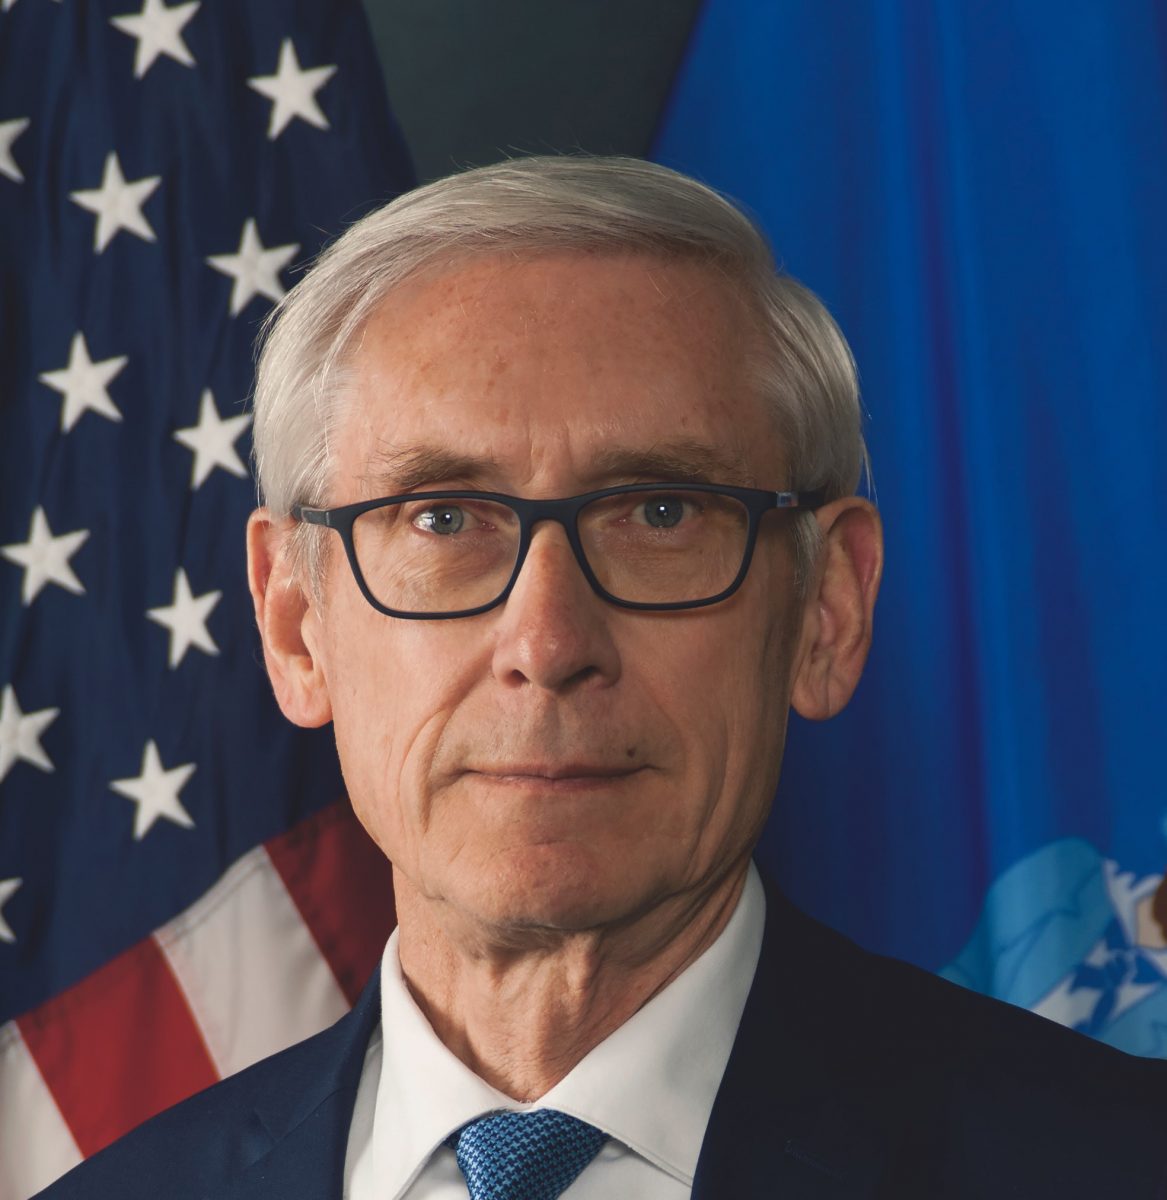 Gov. Evers Signs Executive Order on Indigenous Peoples Day Issuing Formal Acknowledgement, Apology for State’s Historical Role in Indian Boarding Schools